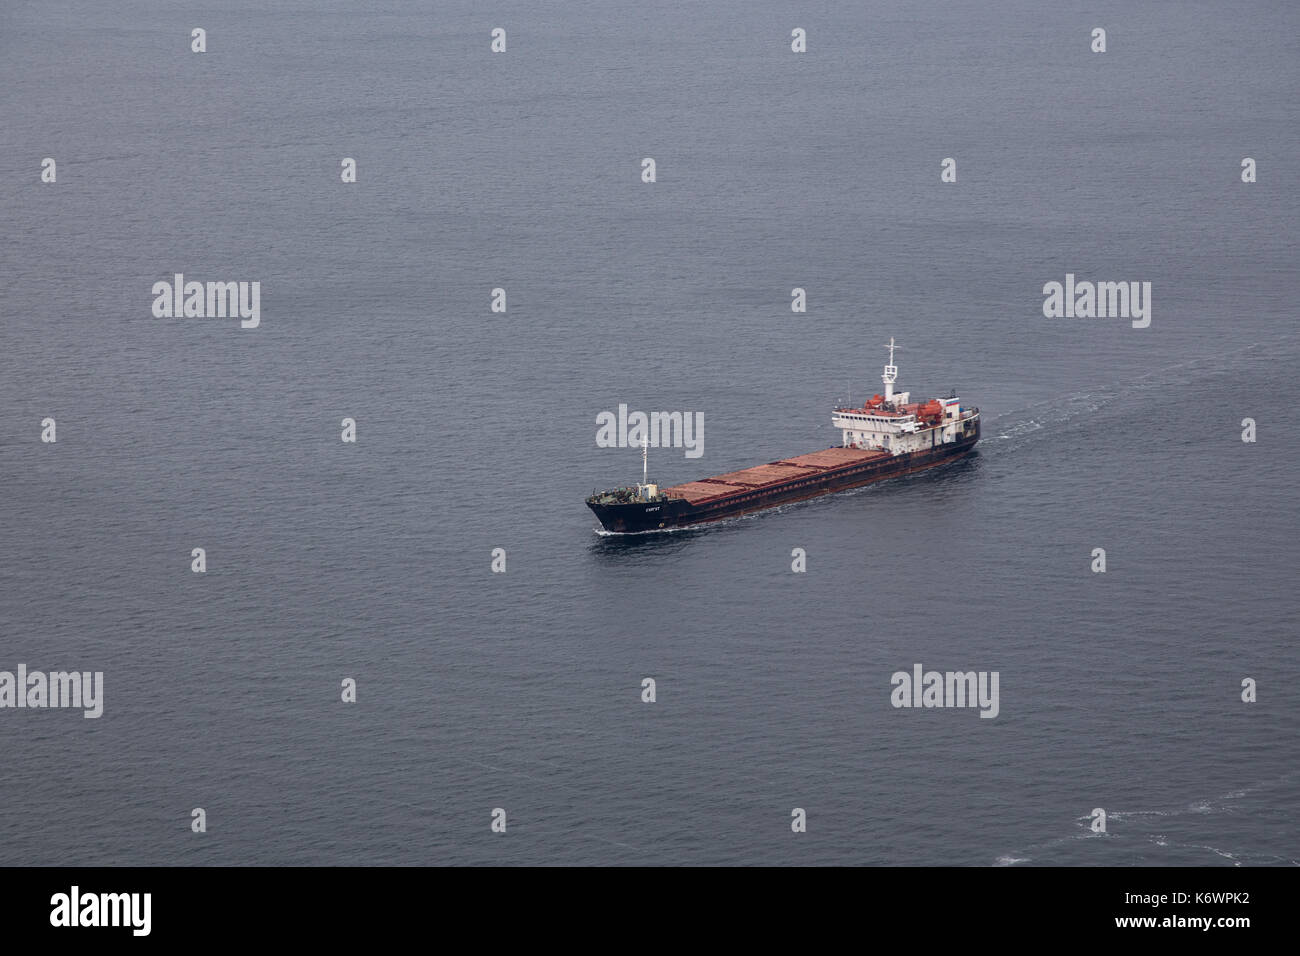 Cargo Container Ship Aerial View Stock Photo